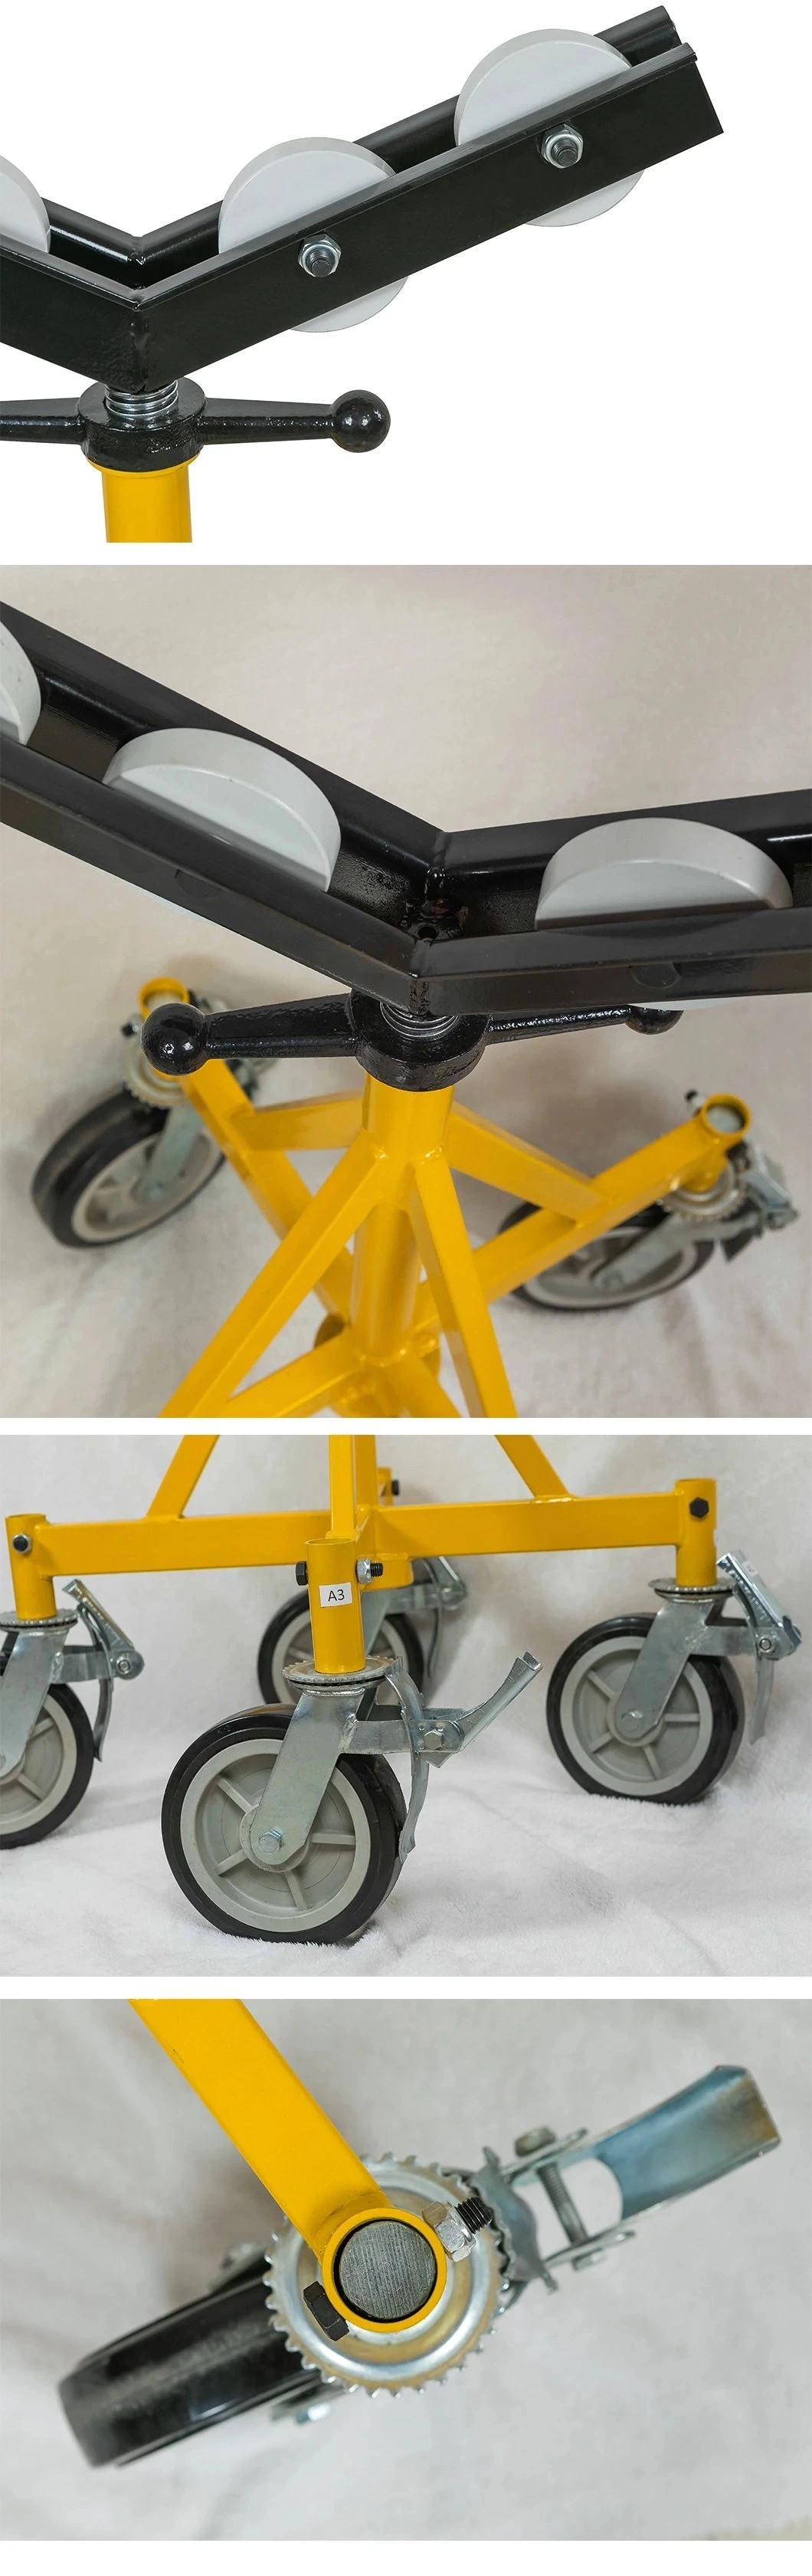 Hot Sale Big Pipe Jack Stand Pipe Support with Wheel